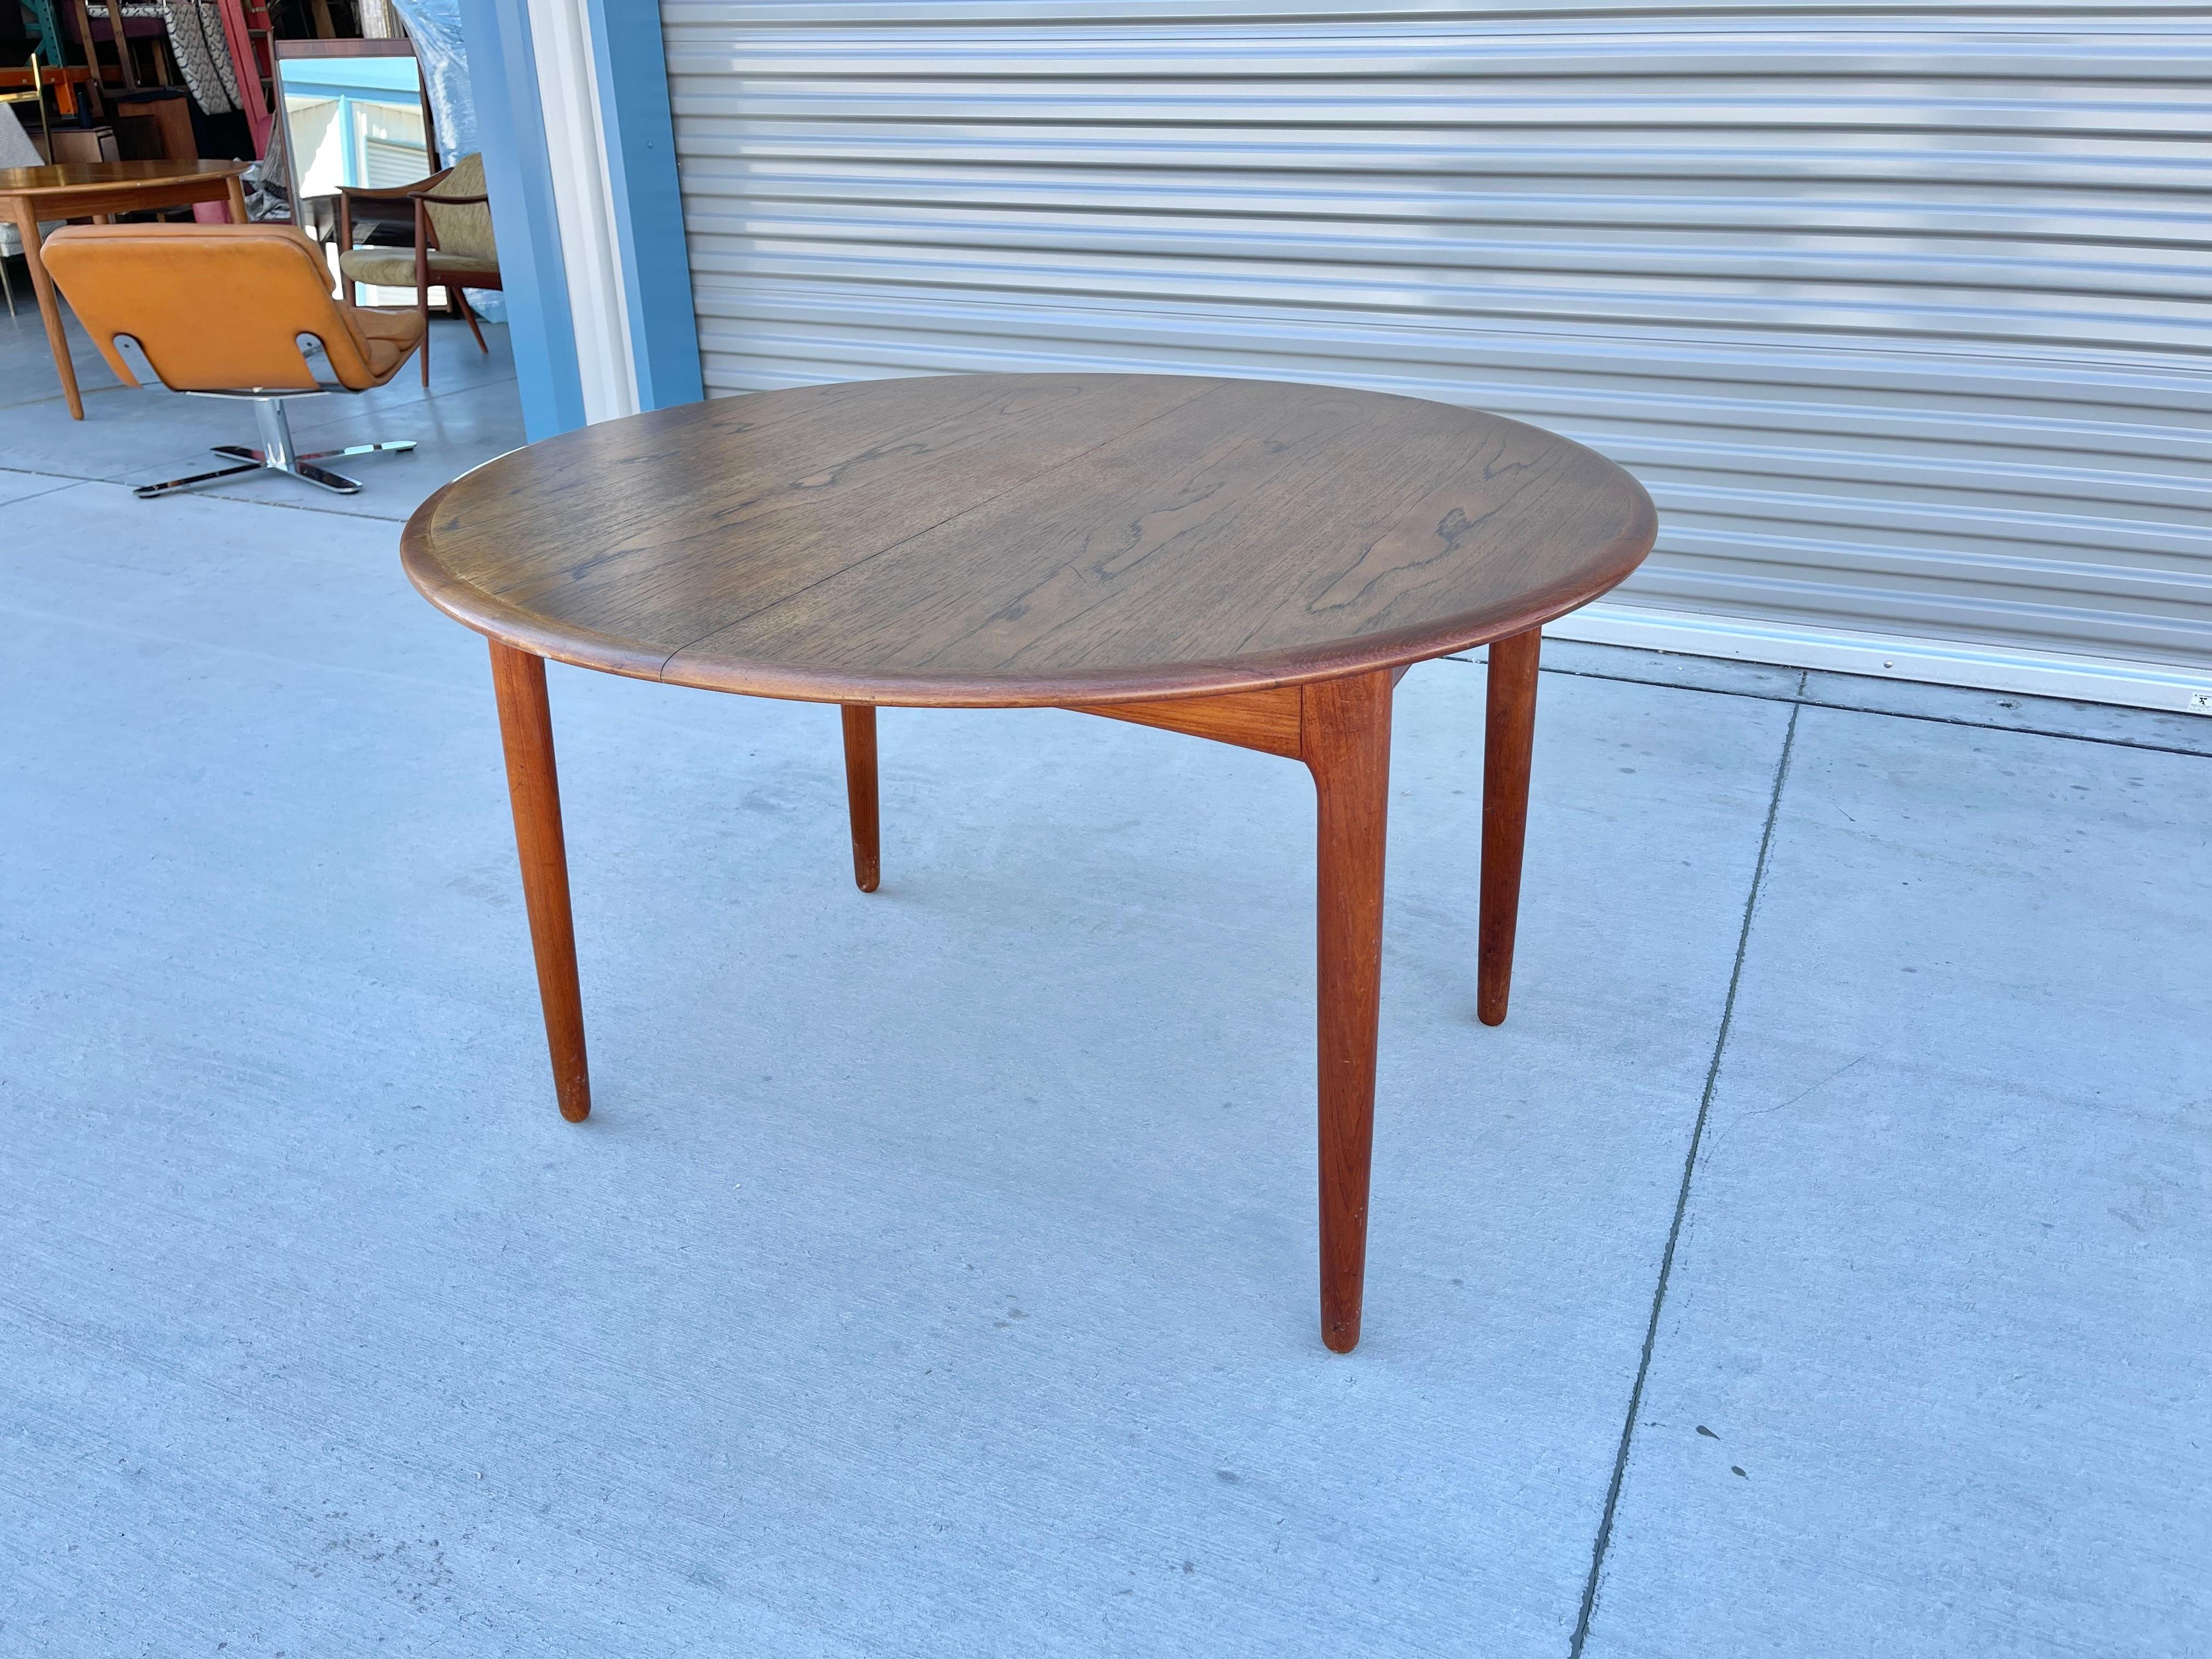 1960s Danish Modern Round Teak Dining Table In Good Condition For Sale In North Hollywood, CA